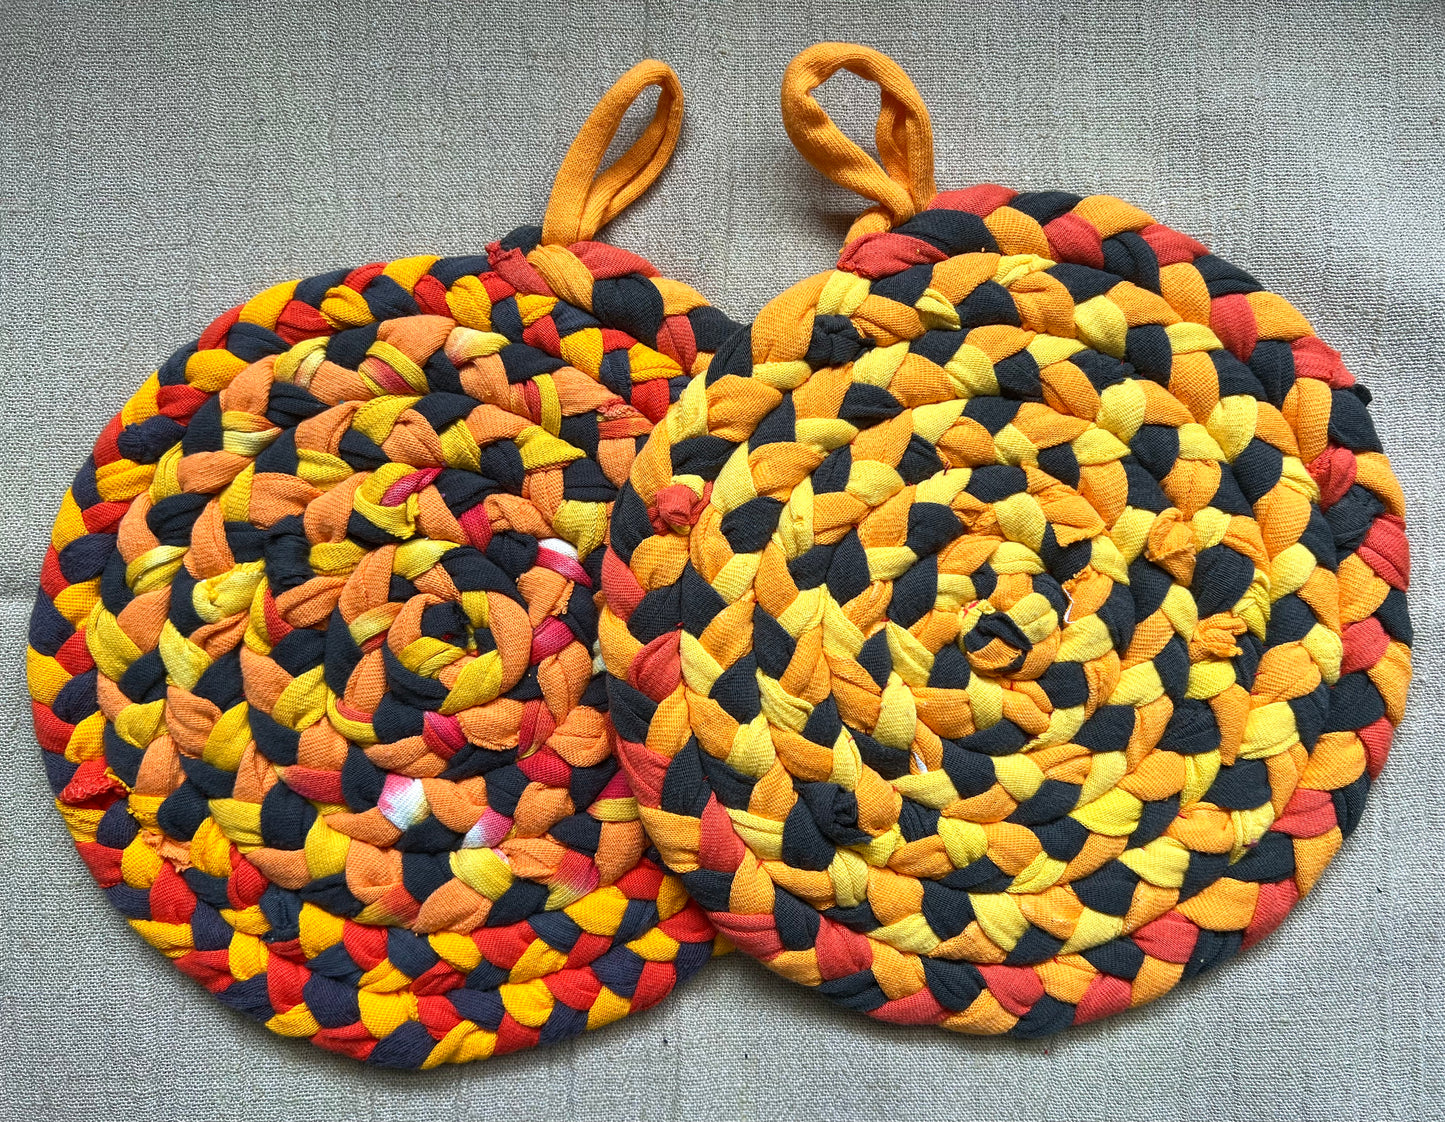 A set of two trivet potholders, side by side, lay flat on a linen surface.